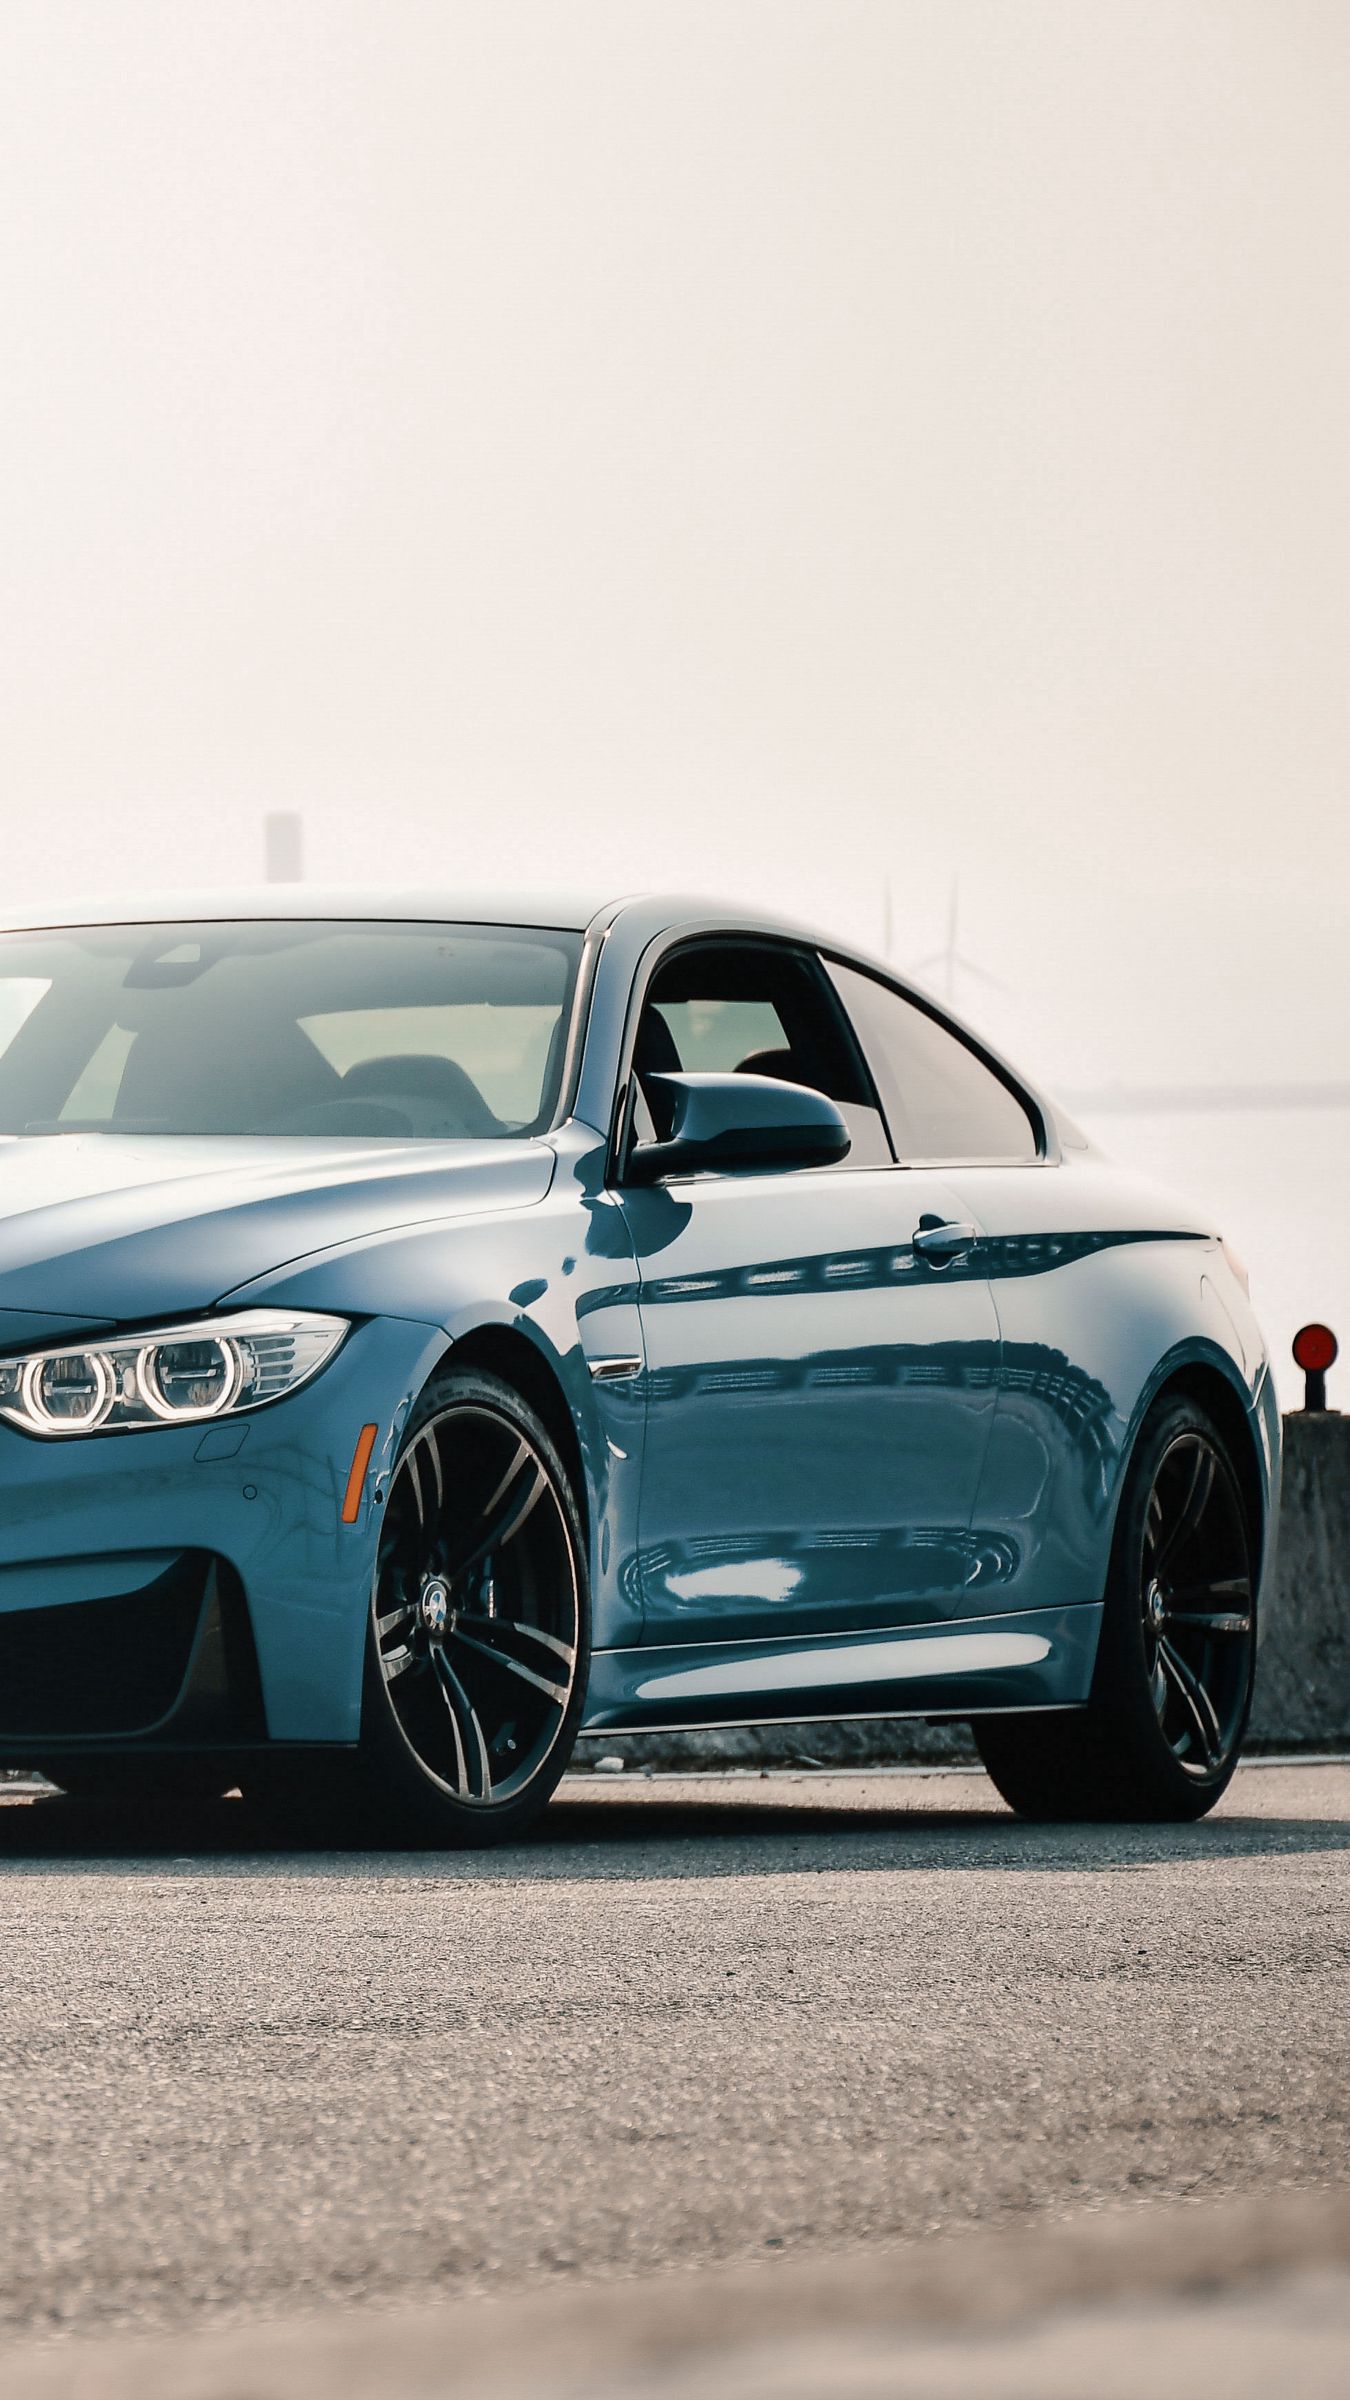 BMW M4 blue car coupe f82 race tuning vehicle HD phone wallpaper   Peakpx